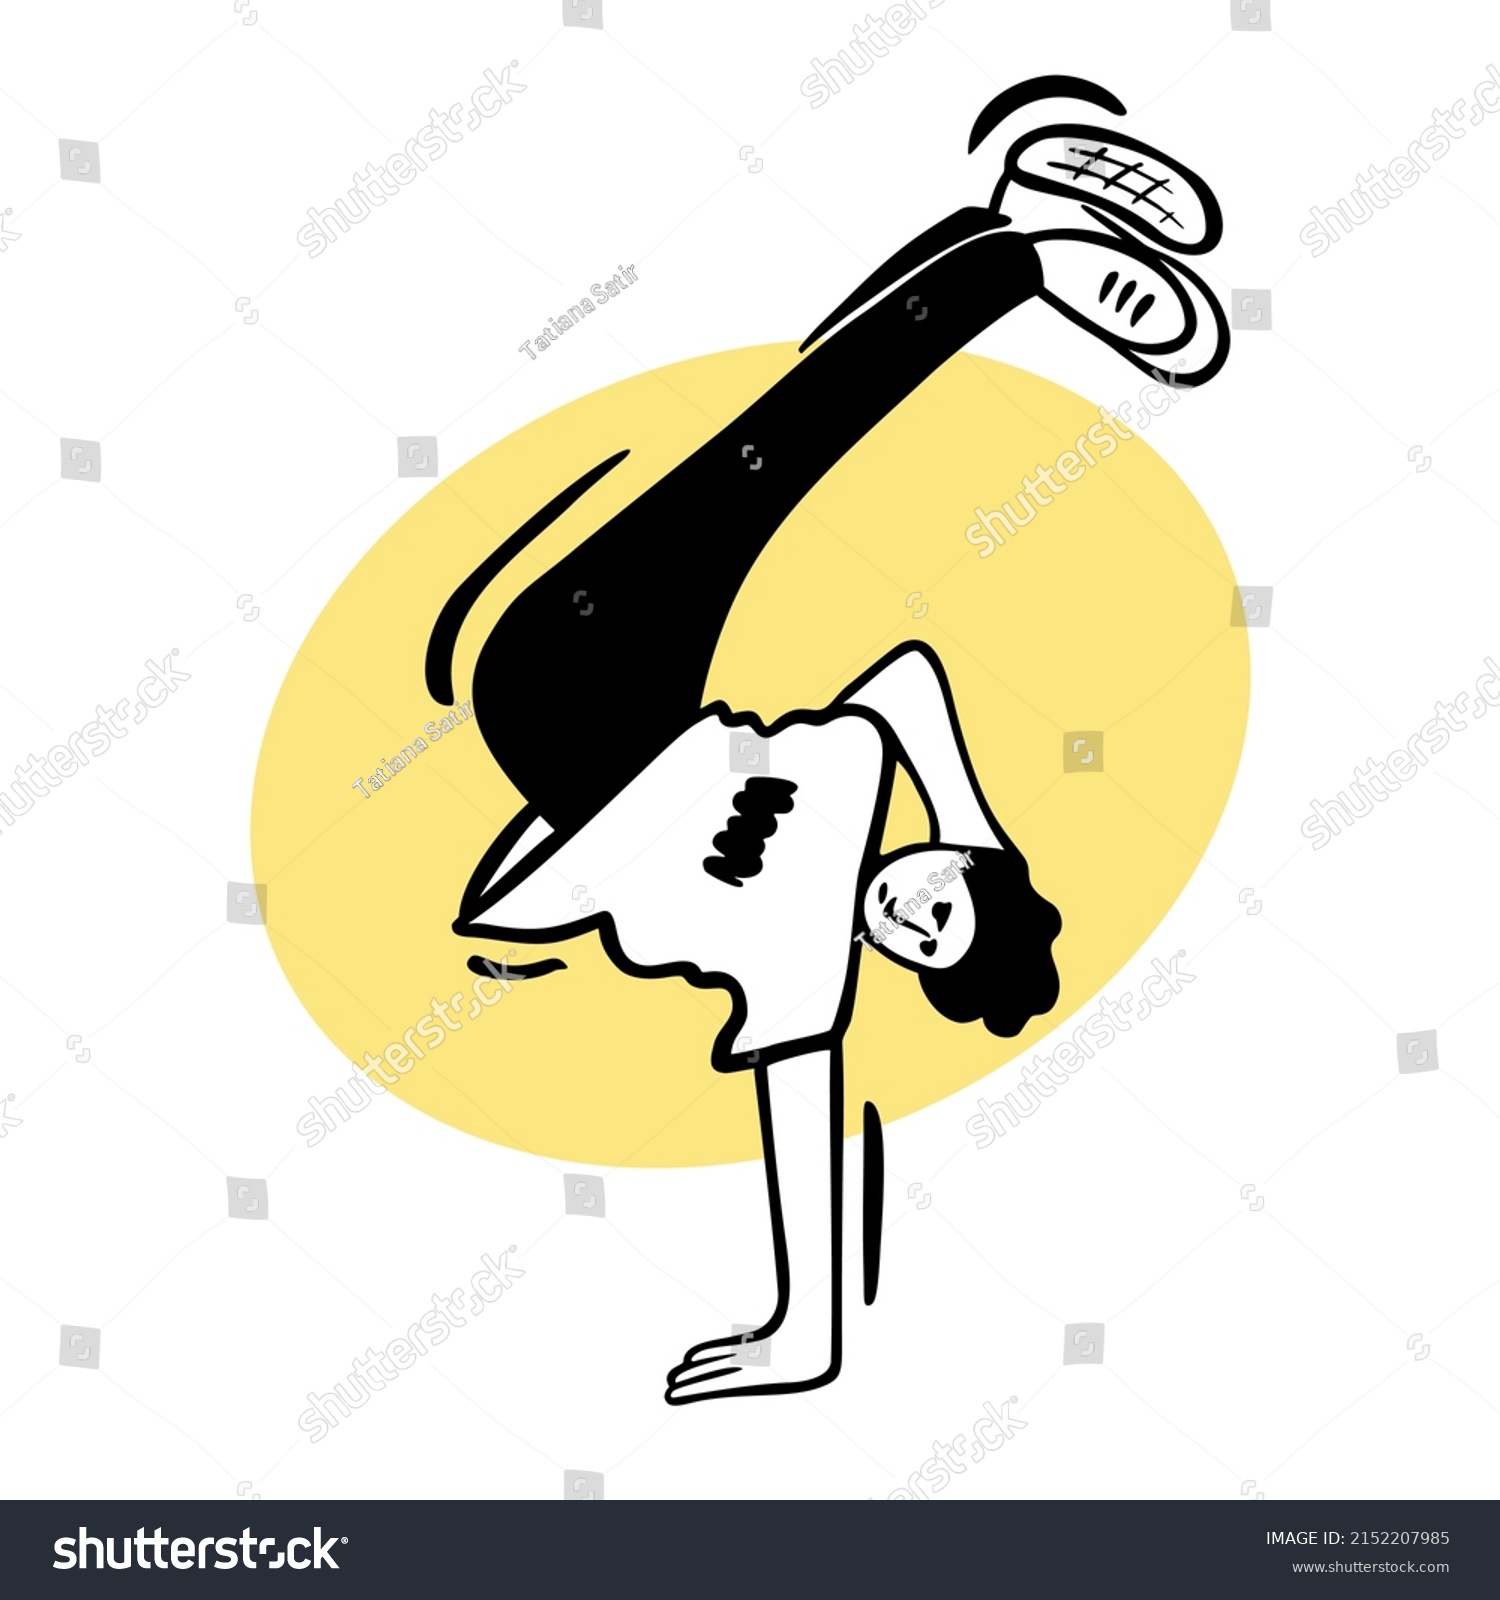 SVG of Break dancer performing stunts. B-boy jumping. Street dance kick move. Black and white character on yellow circle background. Sketch style vector design illustrations. svg